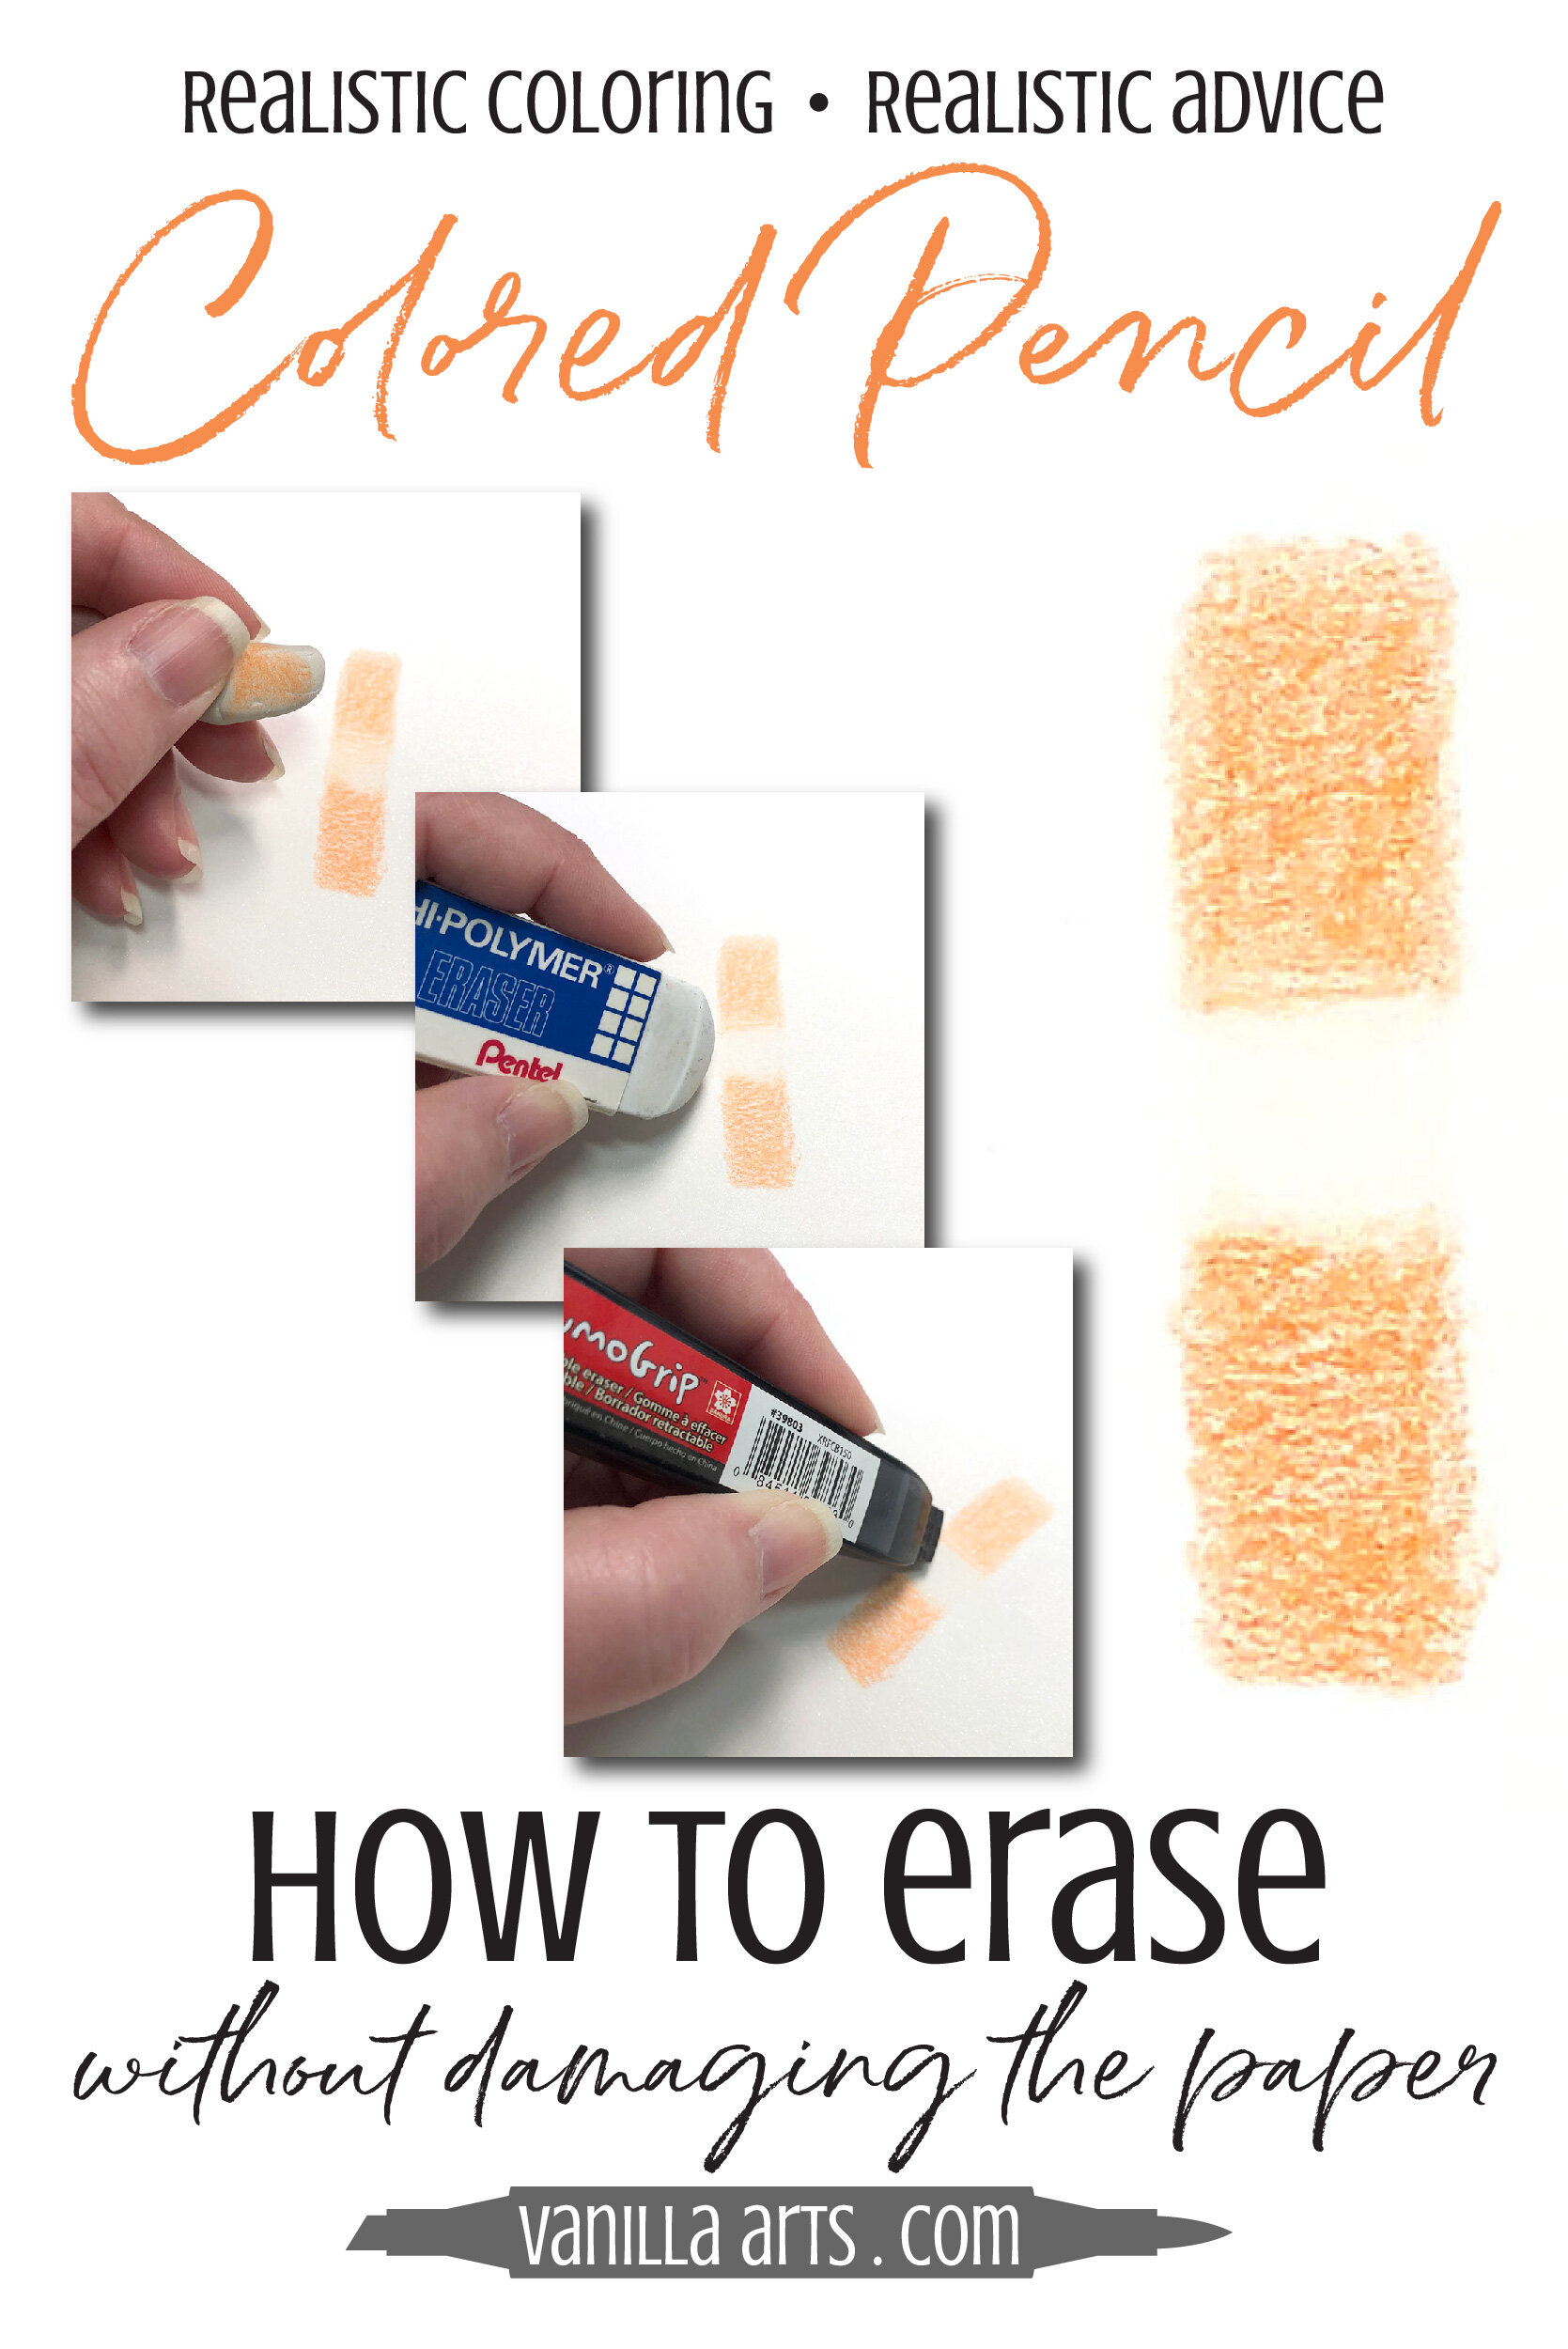 III. Factors to Consider When Choosing an Eraser for Coloring Mistakes